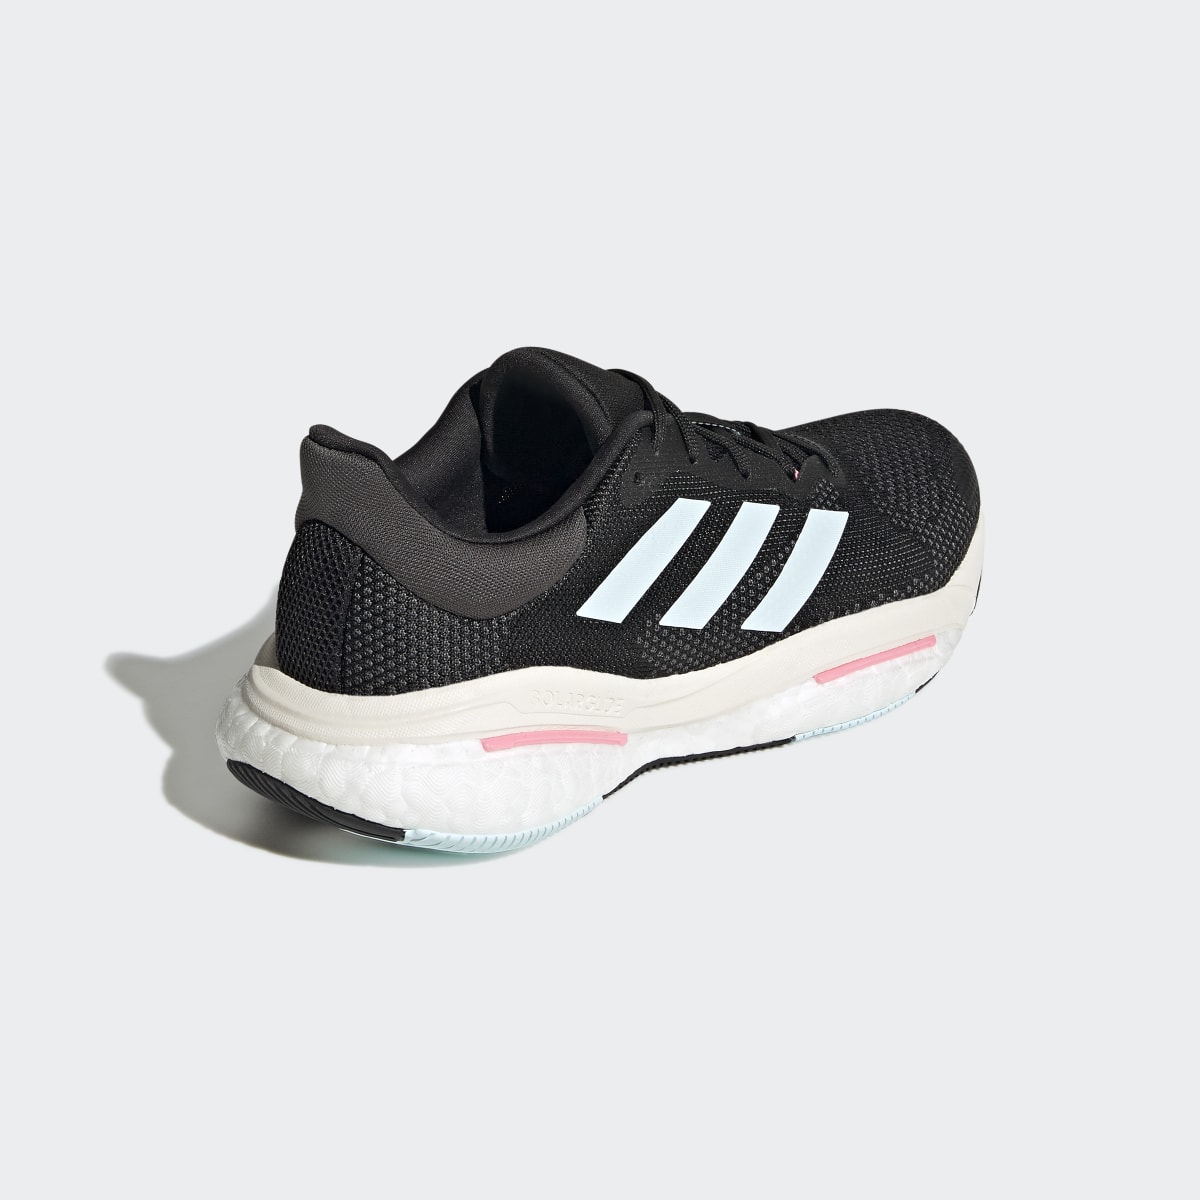 Adidas Solarglide 5 Running Shoes. 6